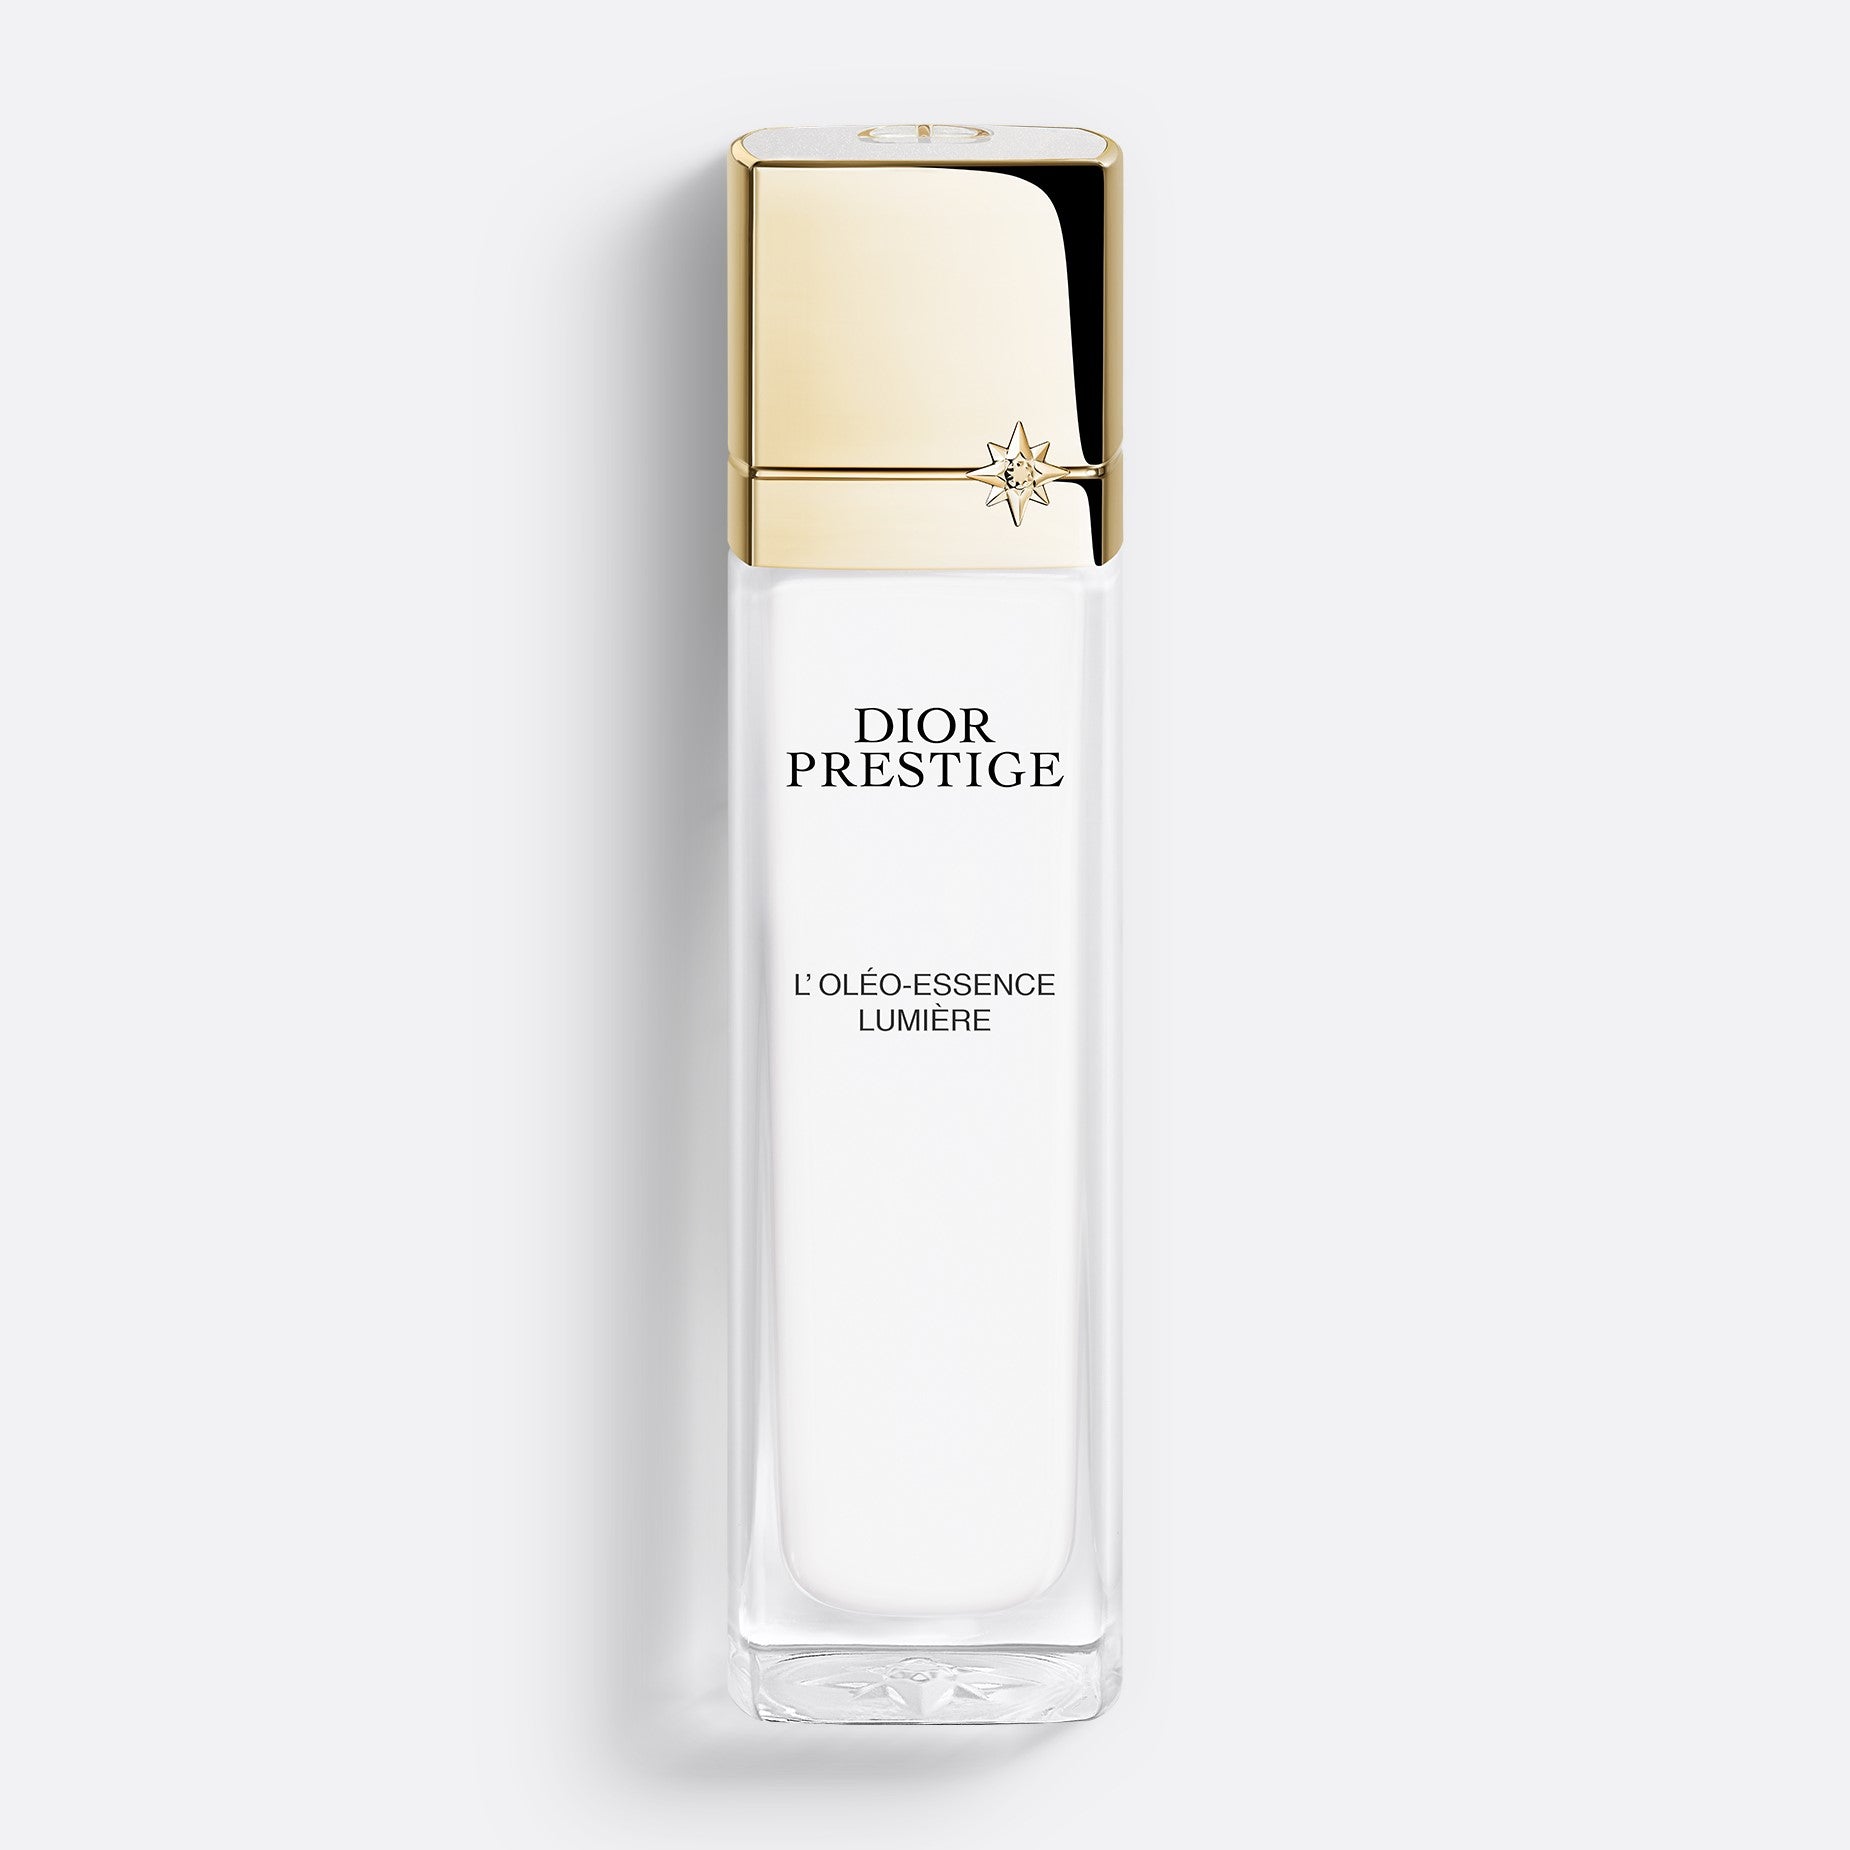 DIOR PRESTIGE L’OLÉO-ESSENCE LUMIÈRE | Exfoliating and Brightening Lotion - Face and Neck